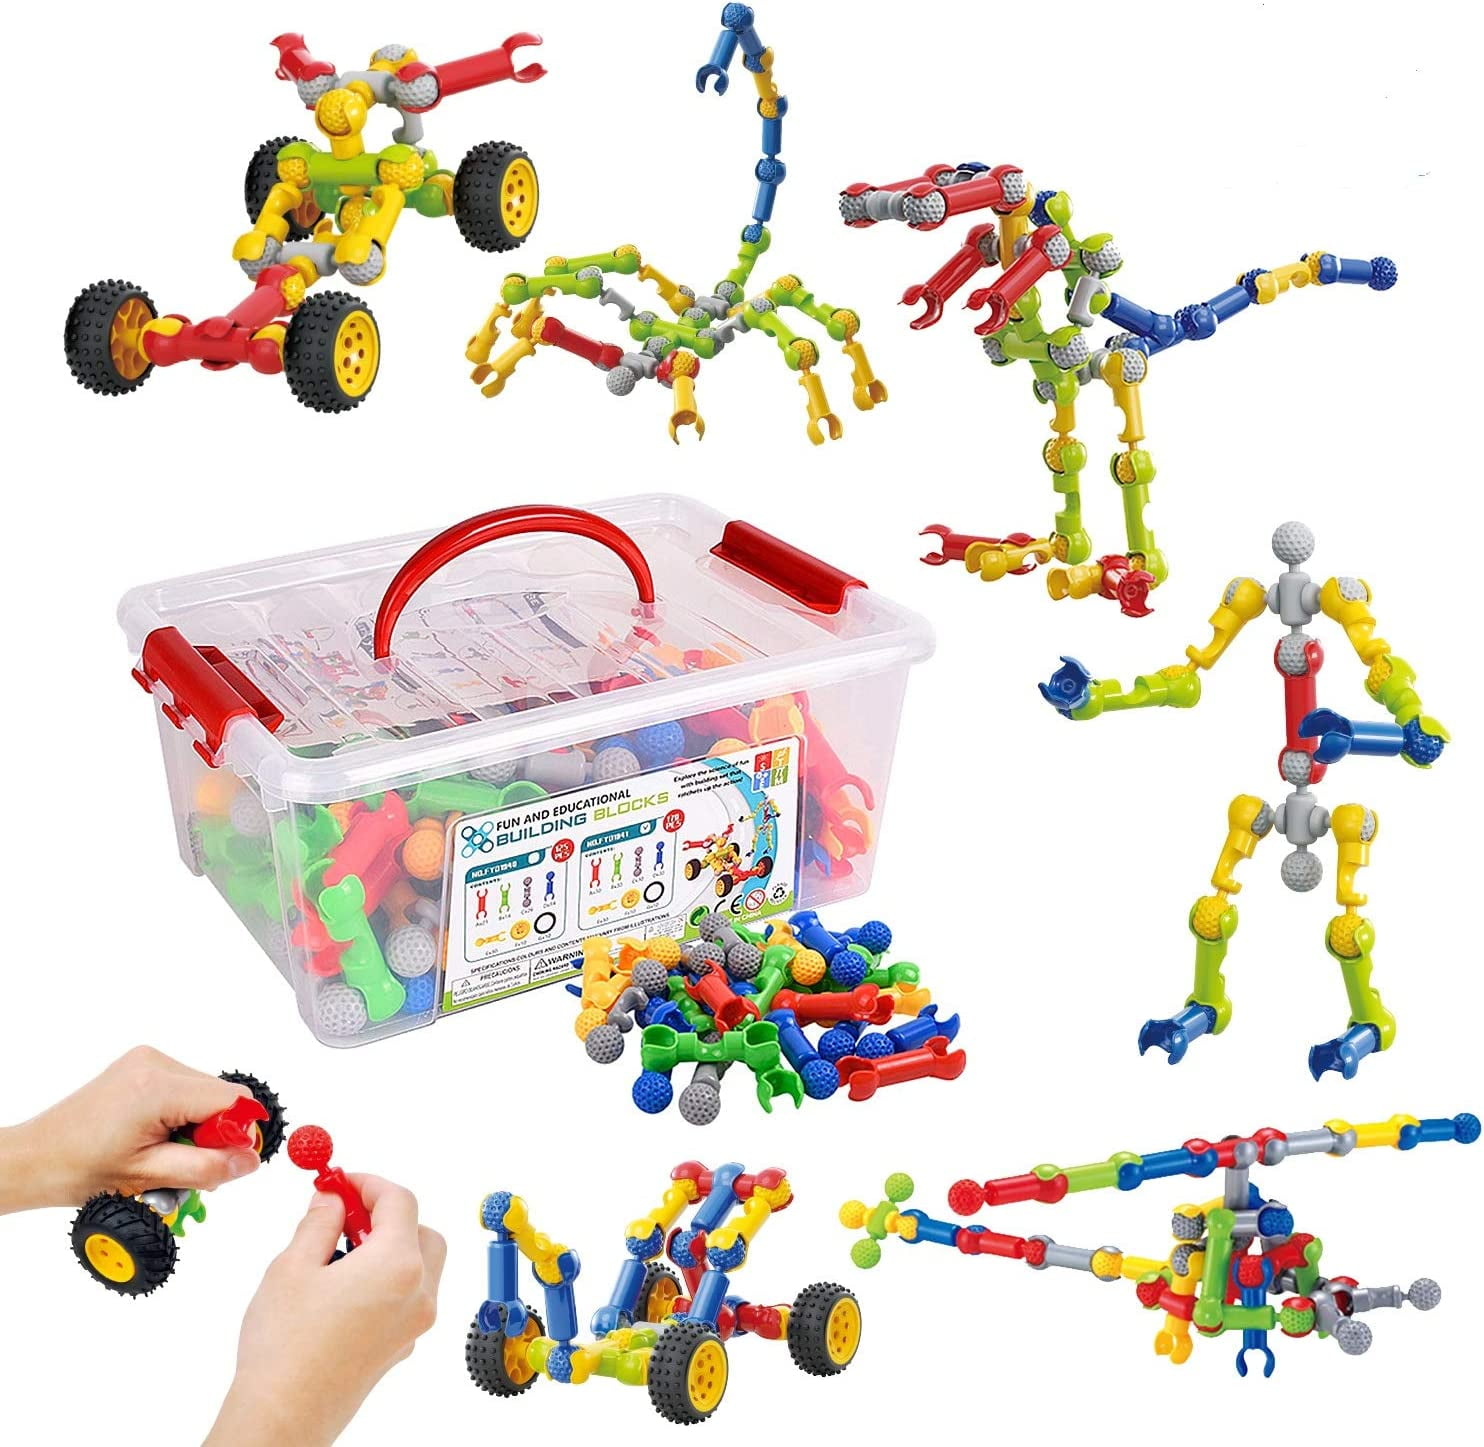 12-in-1 Stem Kit Toy for Kids - 152 Piece Construction Building Set and Education Learning Engineering Play Kit Idea for Boys and Girls, Building